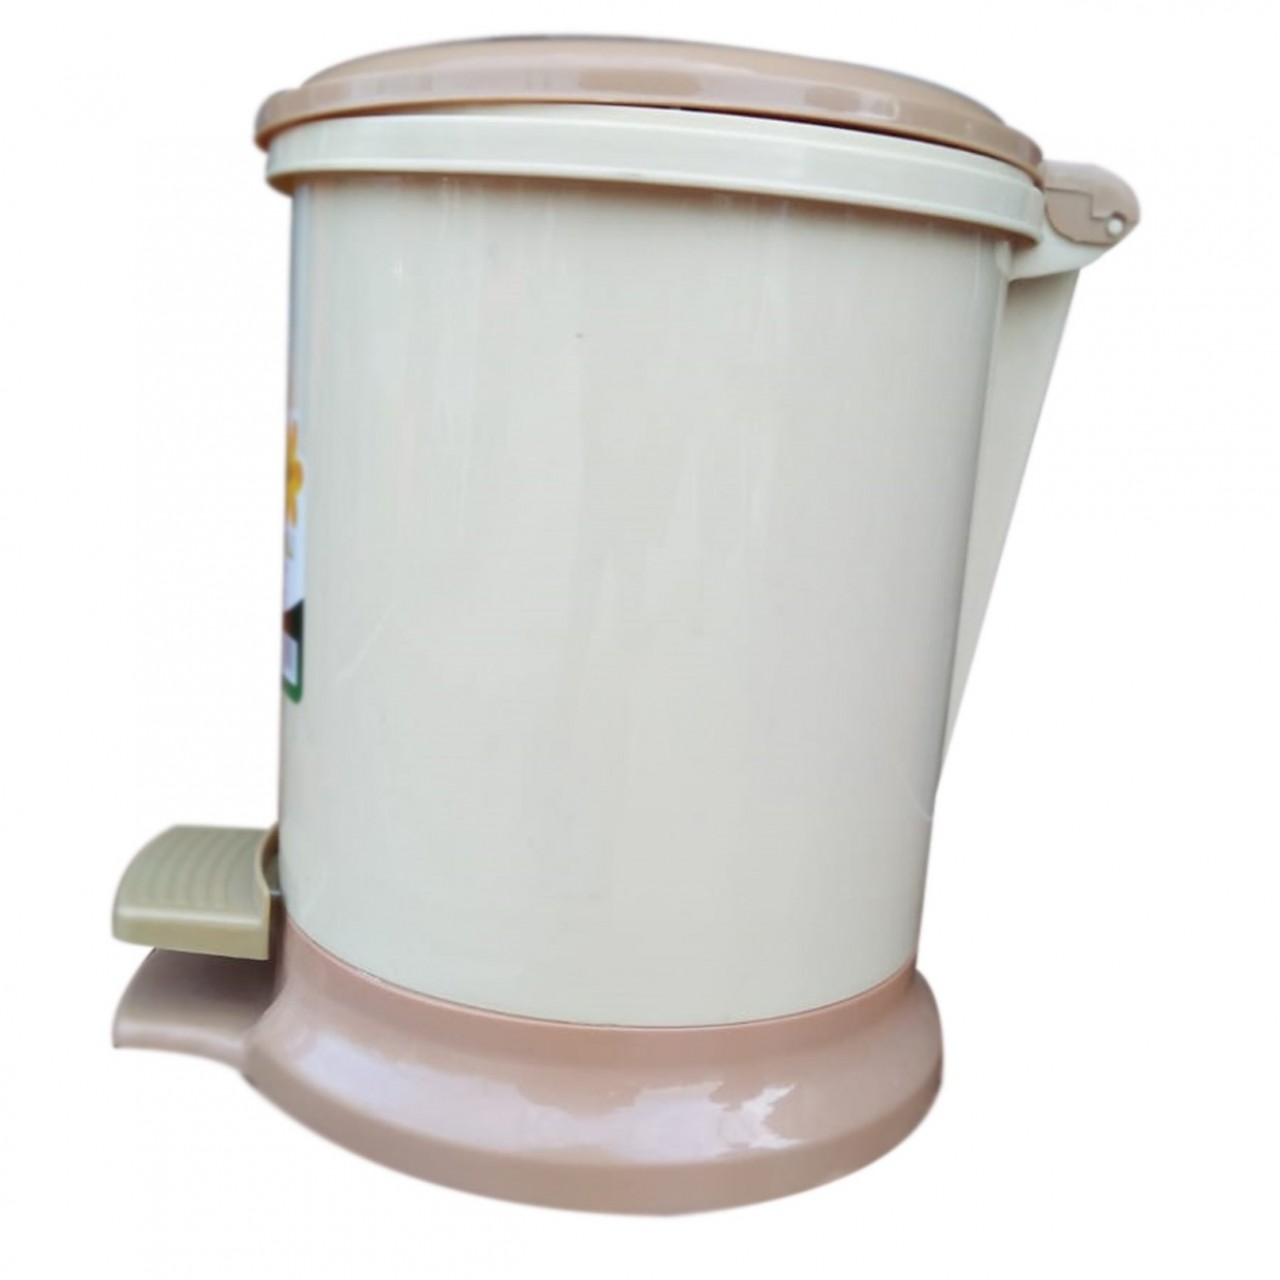 Creative CR-101 Paddle Dustbin For Home & Office Use